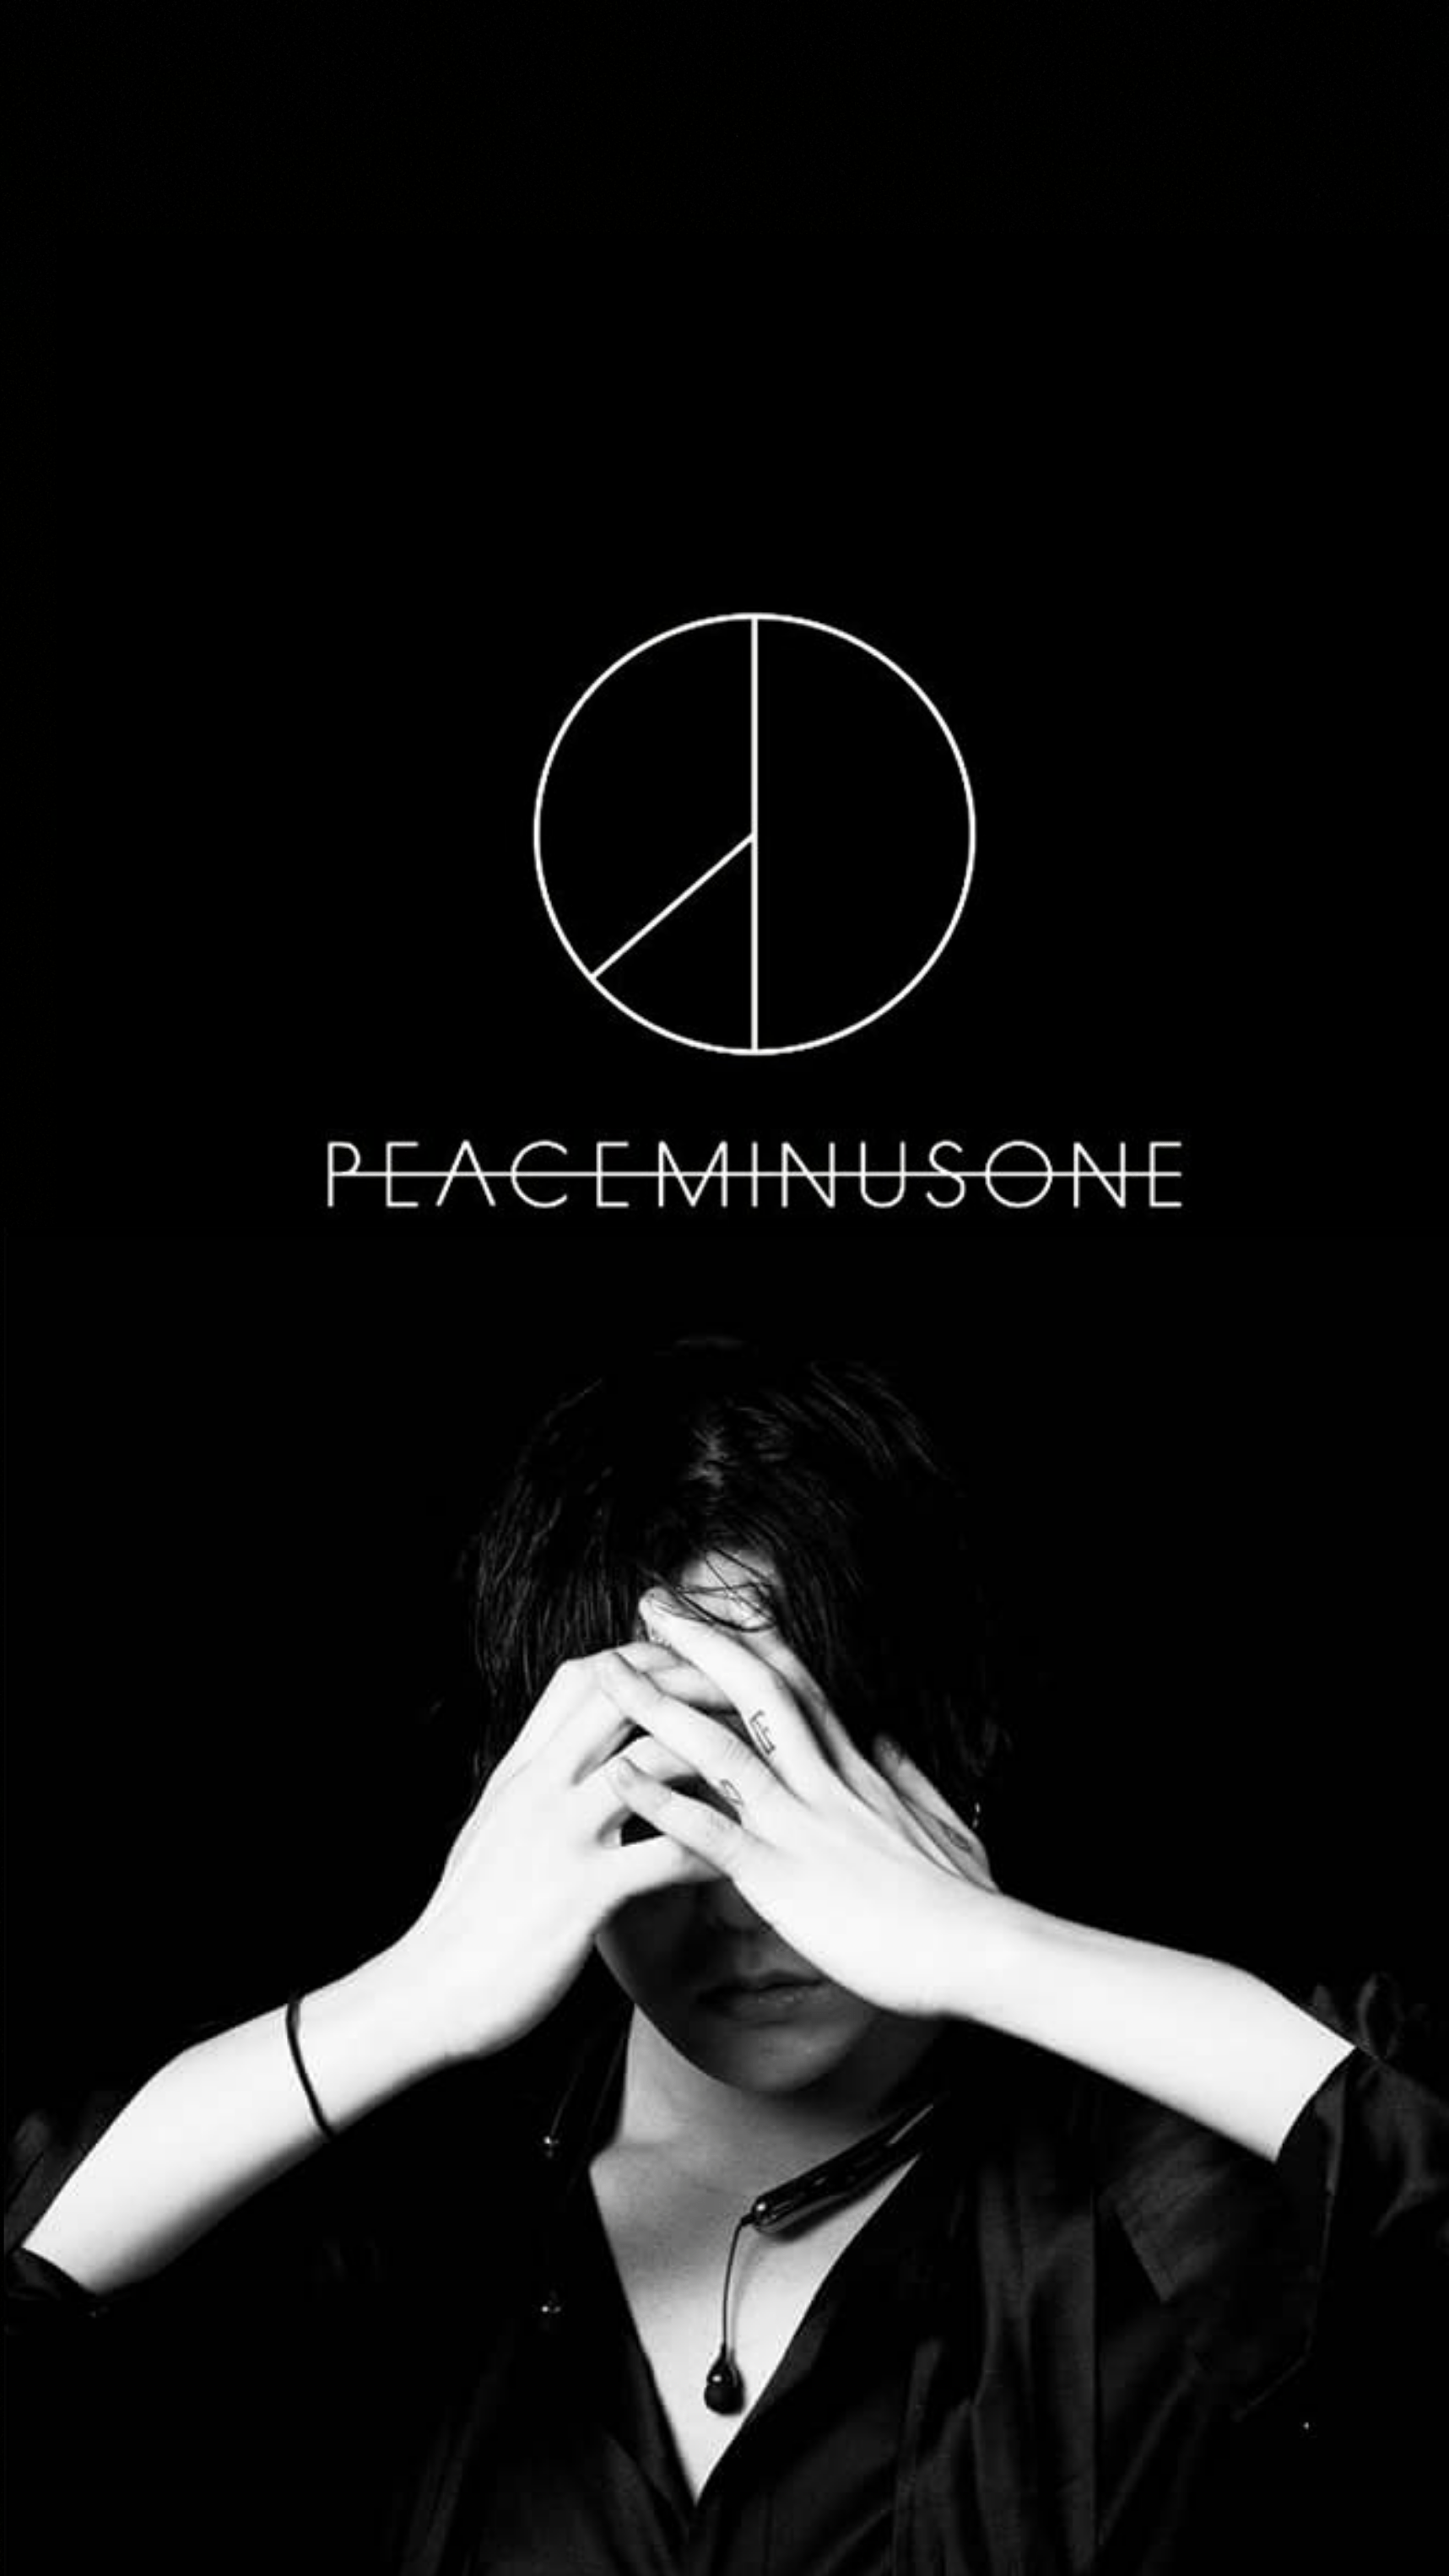 Peaceminusone Wallpapers Top Free Peaceminusone Backgrounds Wallpaperaccess